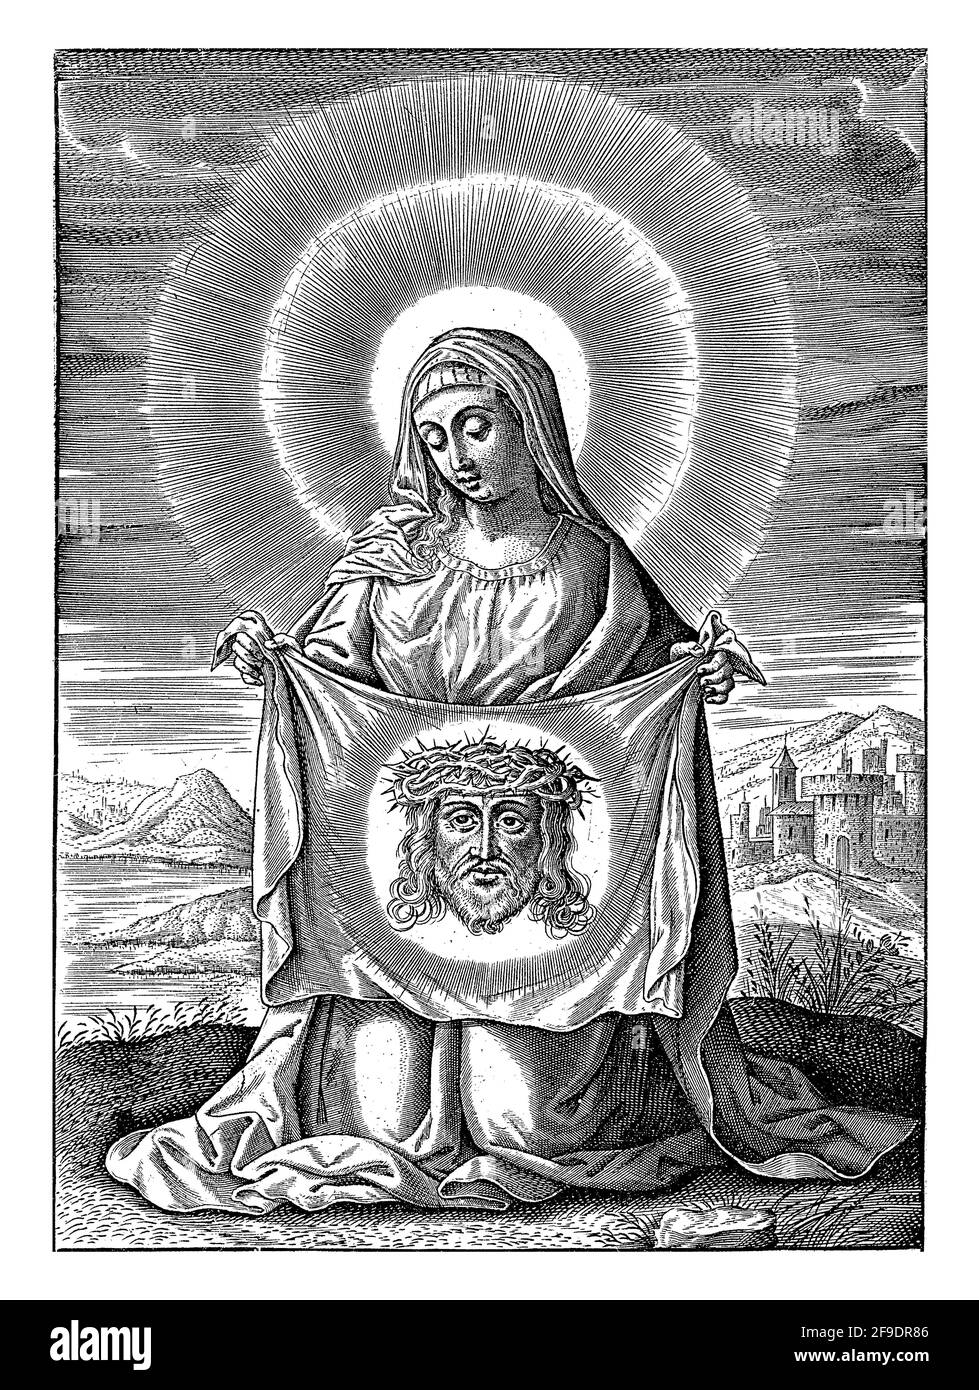 Saint Veronica with the vera icon, the cloth with the image of the face of Christ. Stock Photo